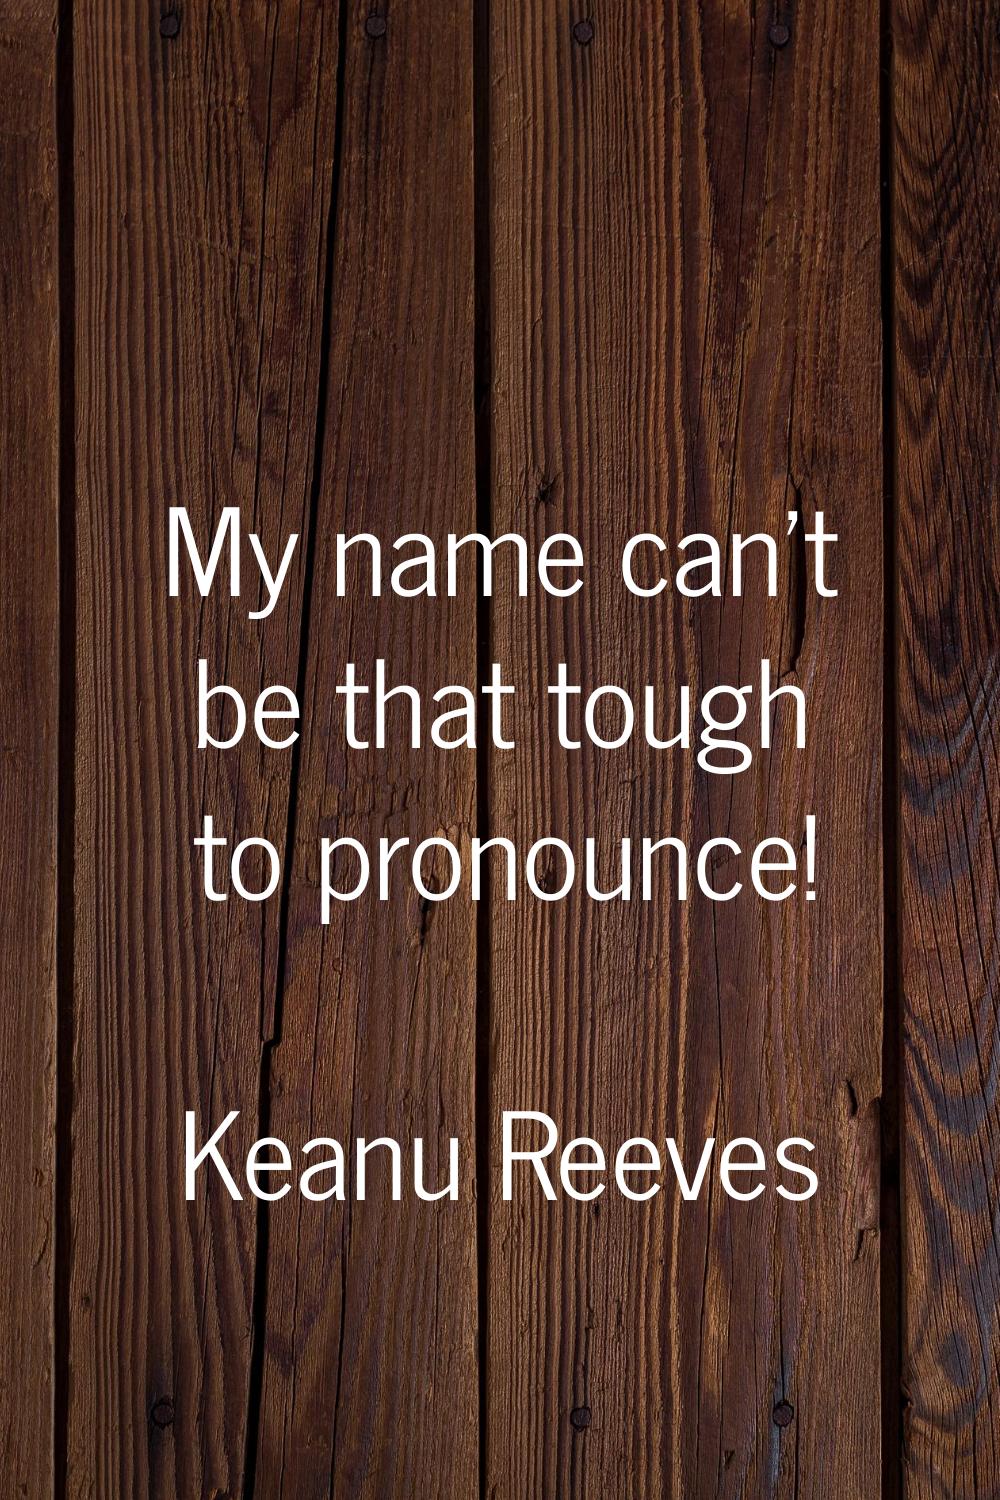 My name can't be that tough to pronounce!